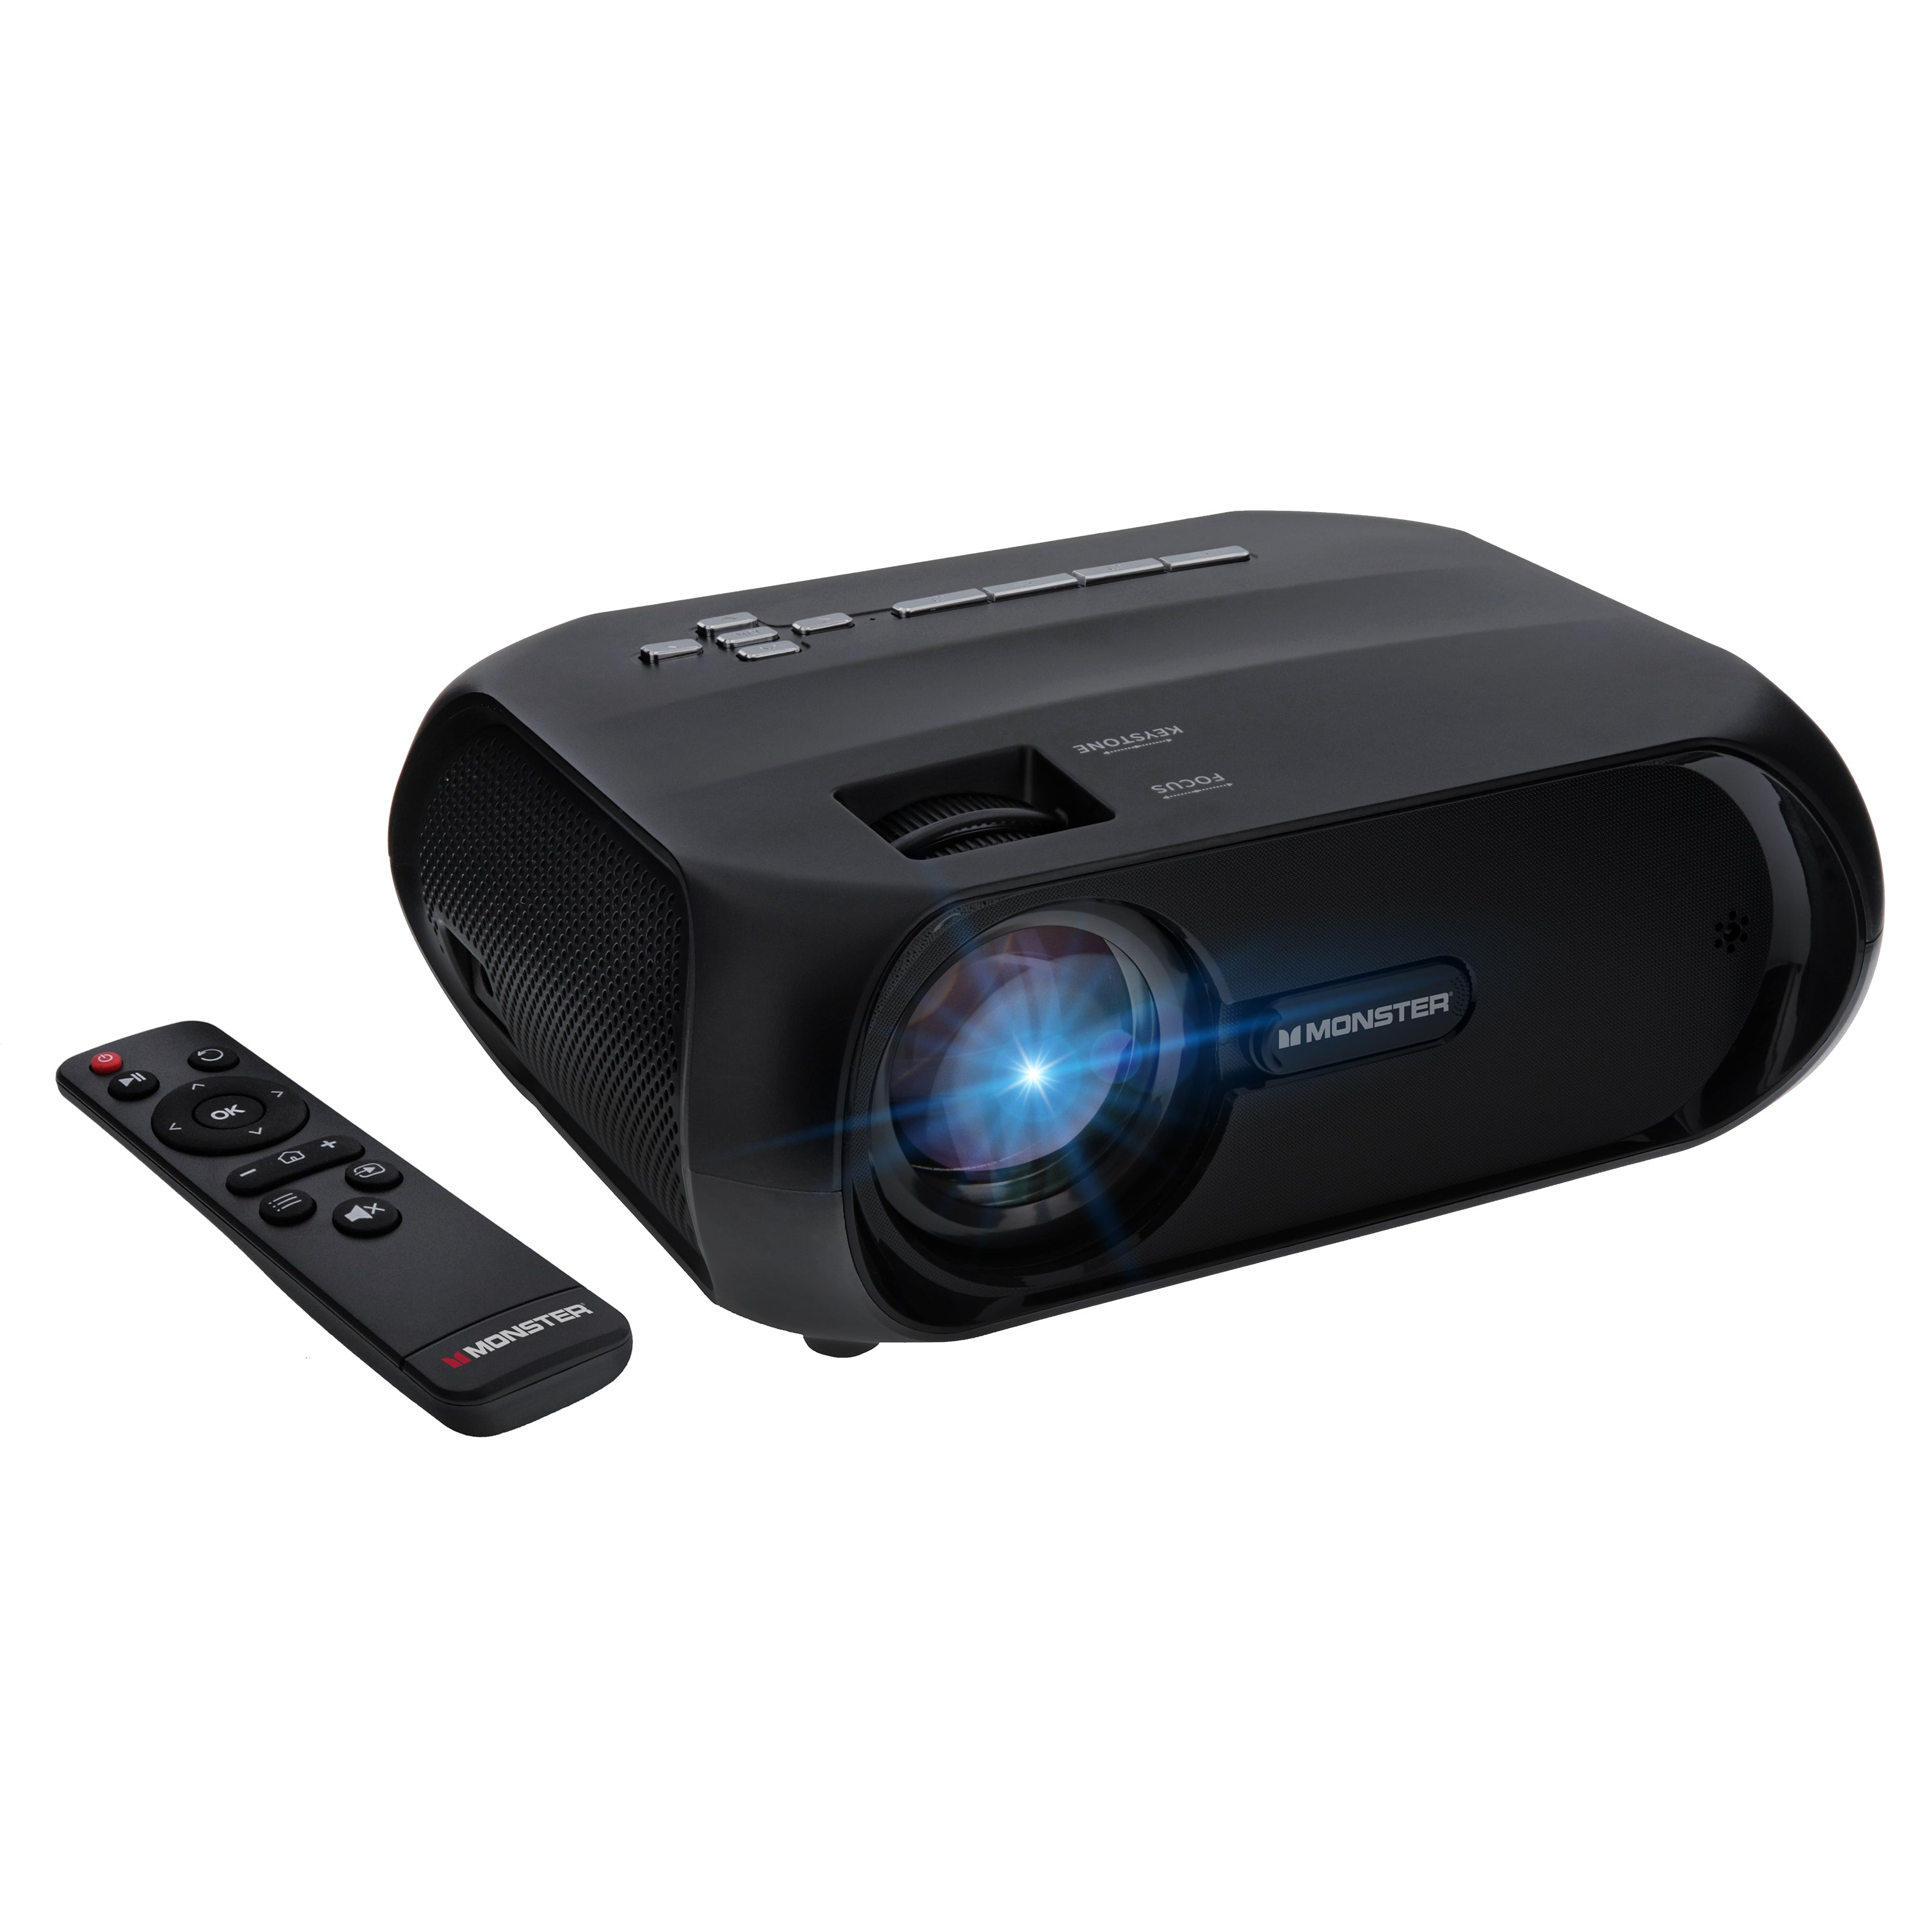 Monster Image Pro 720p Projector